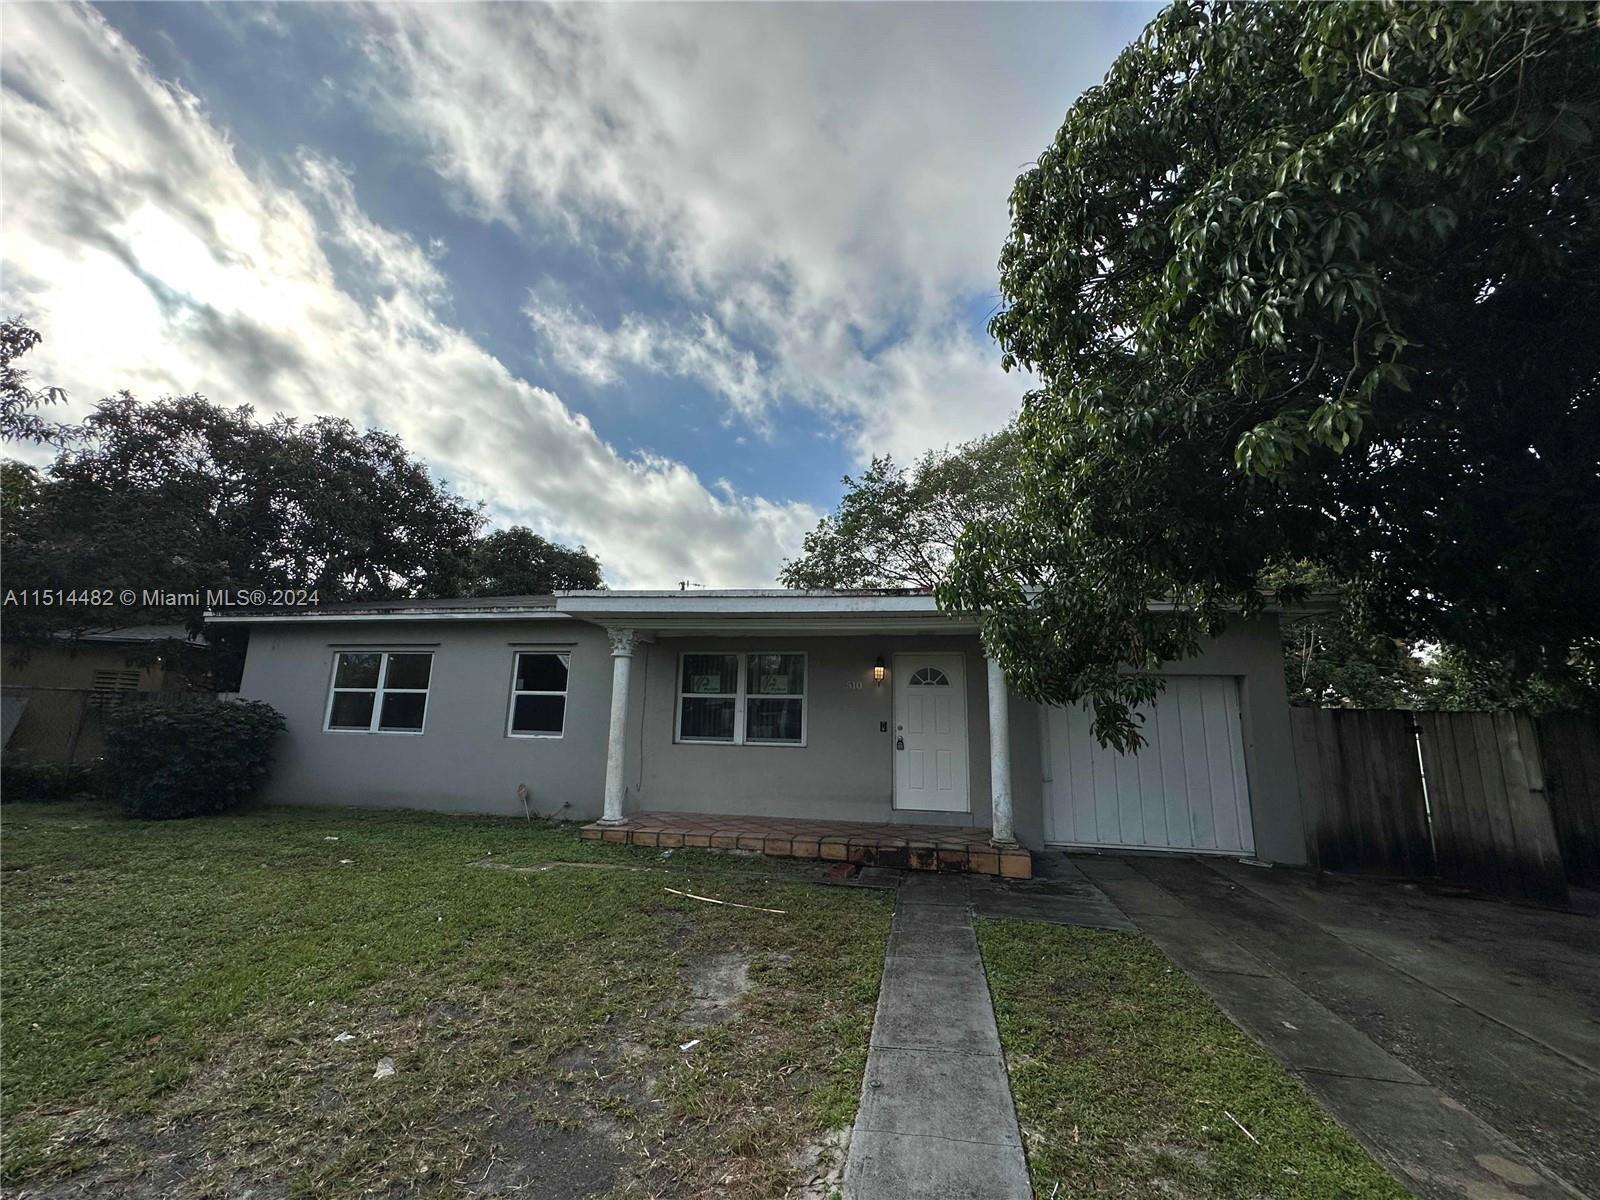 Photo of 510 NW 152nd St in Miami, FL